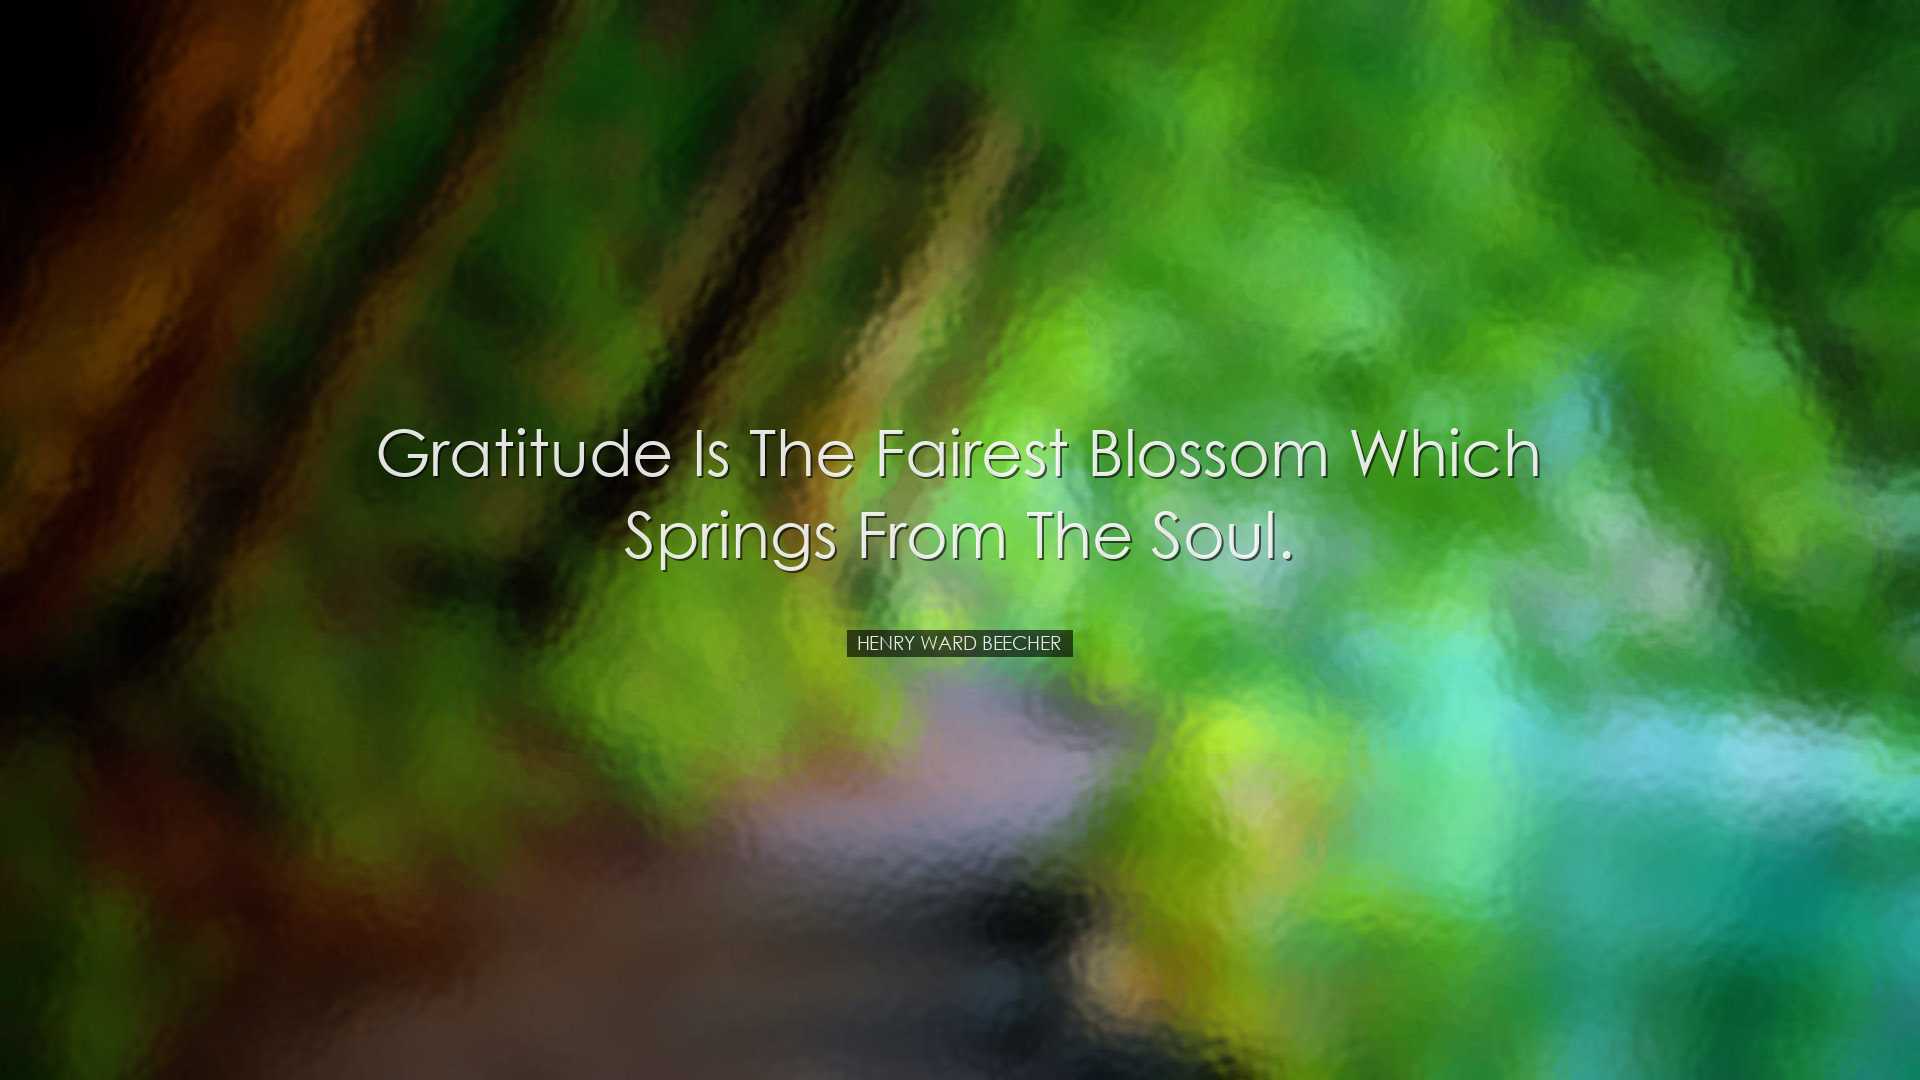 Gratitude is the fairest blossom which springs from the soul. - He